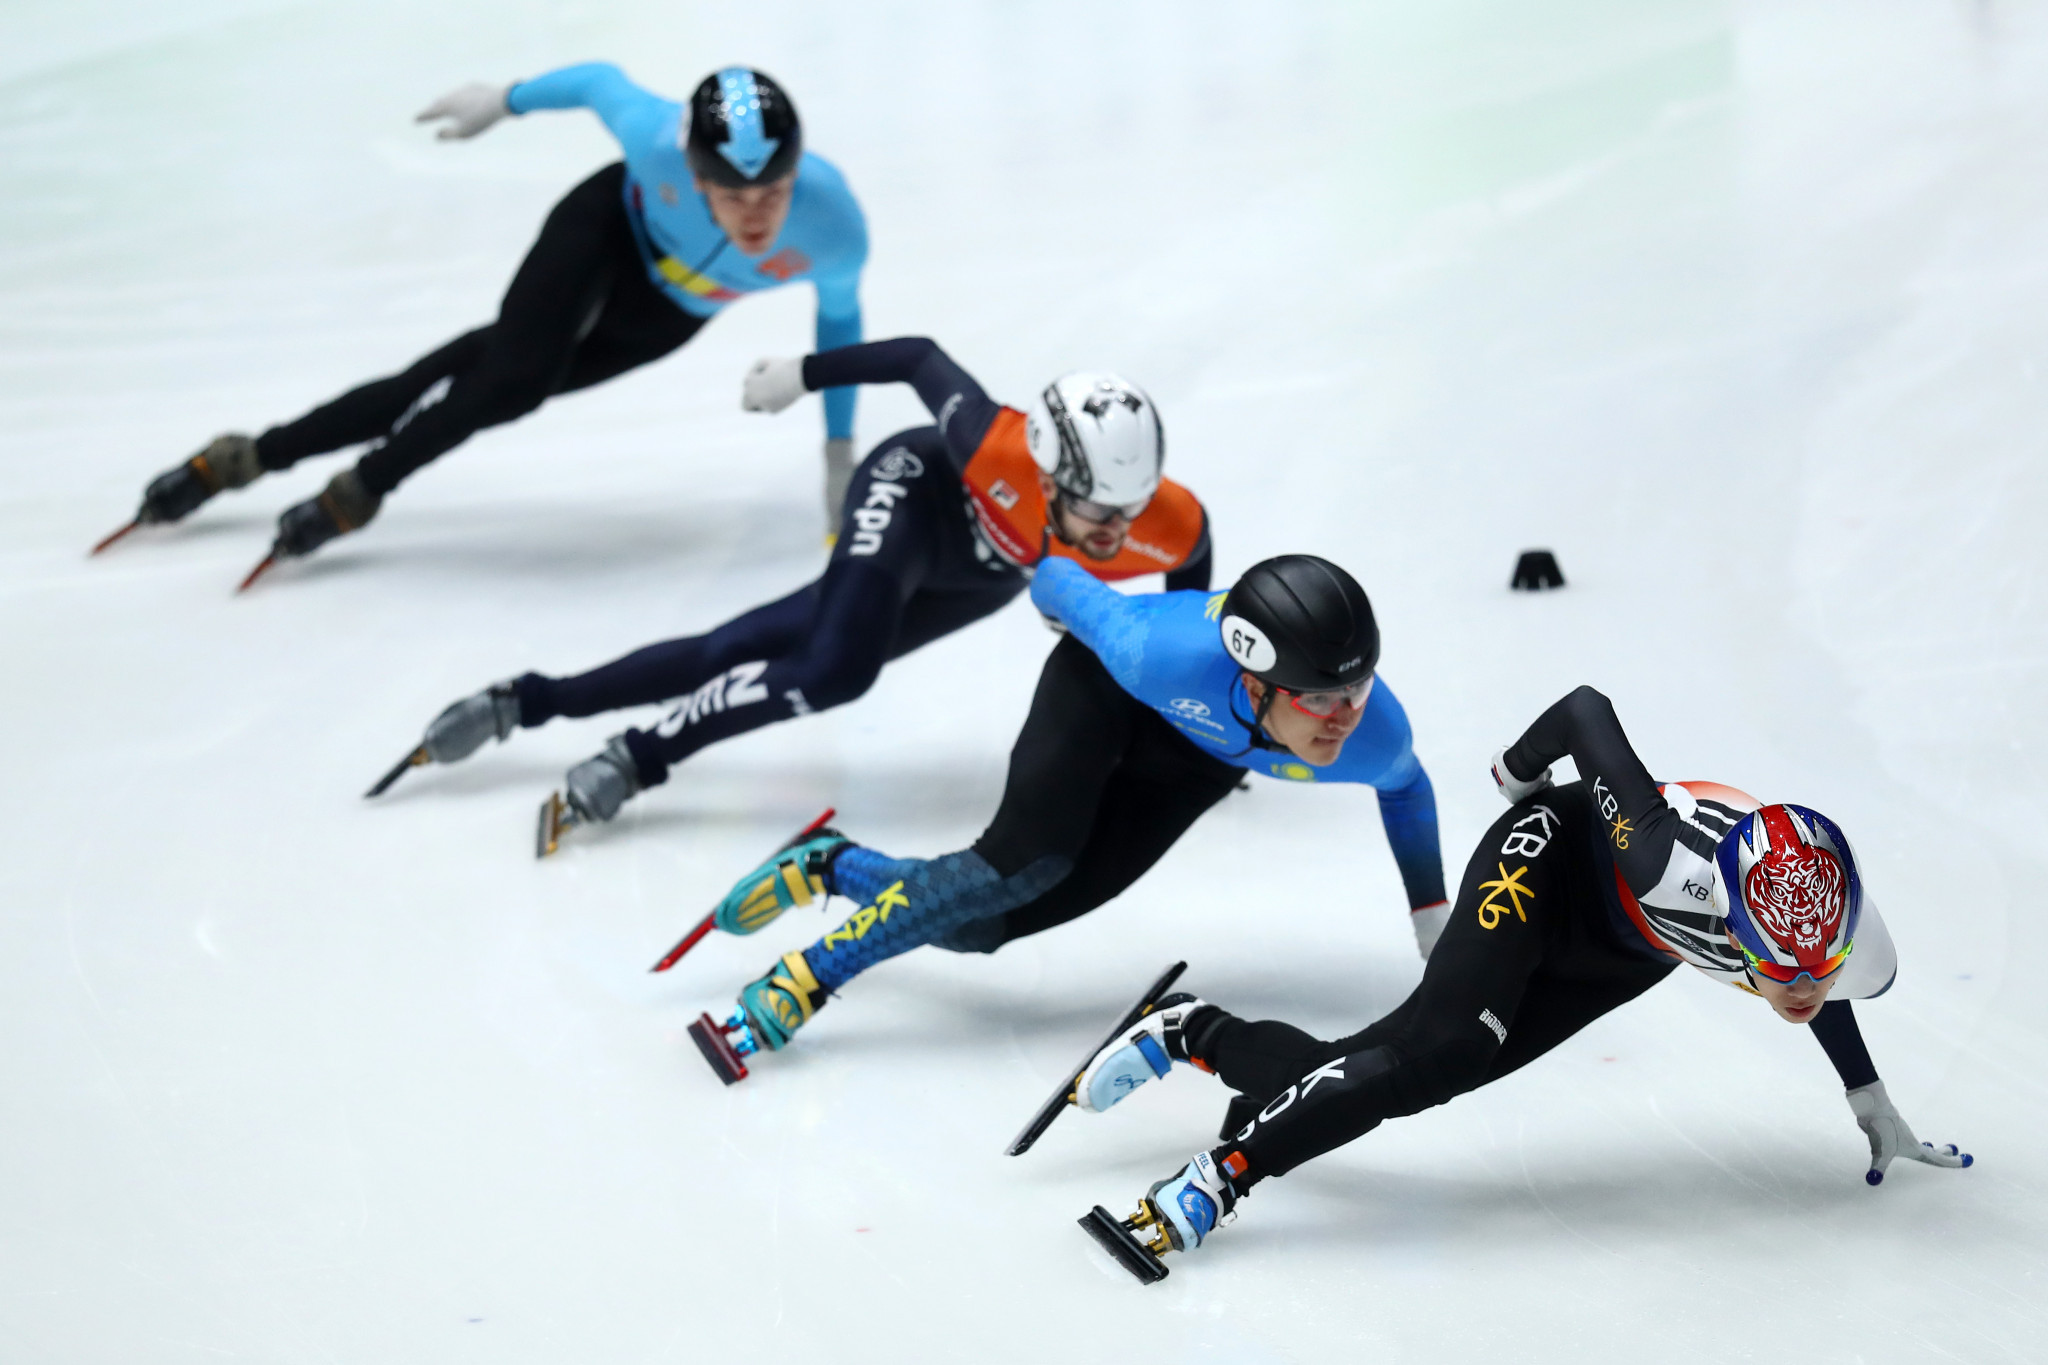 The ISU revealed the World Short Track Speed Skating Championships could take place next season ©Getty Images